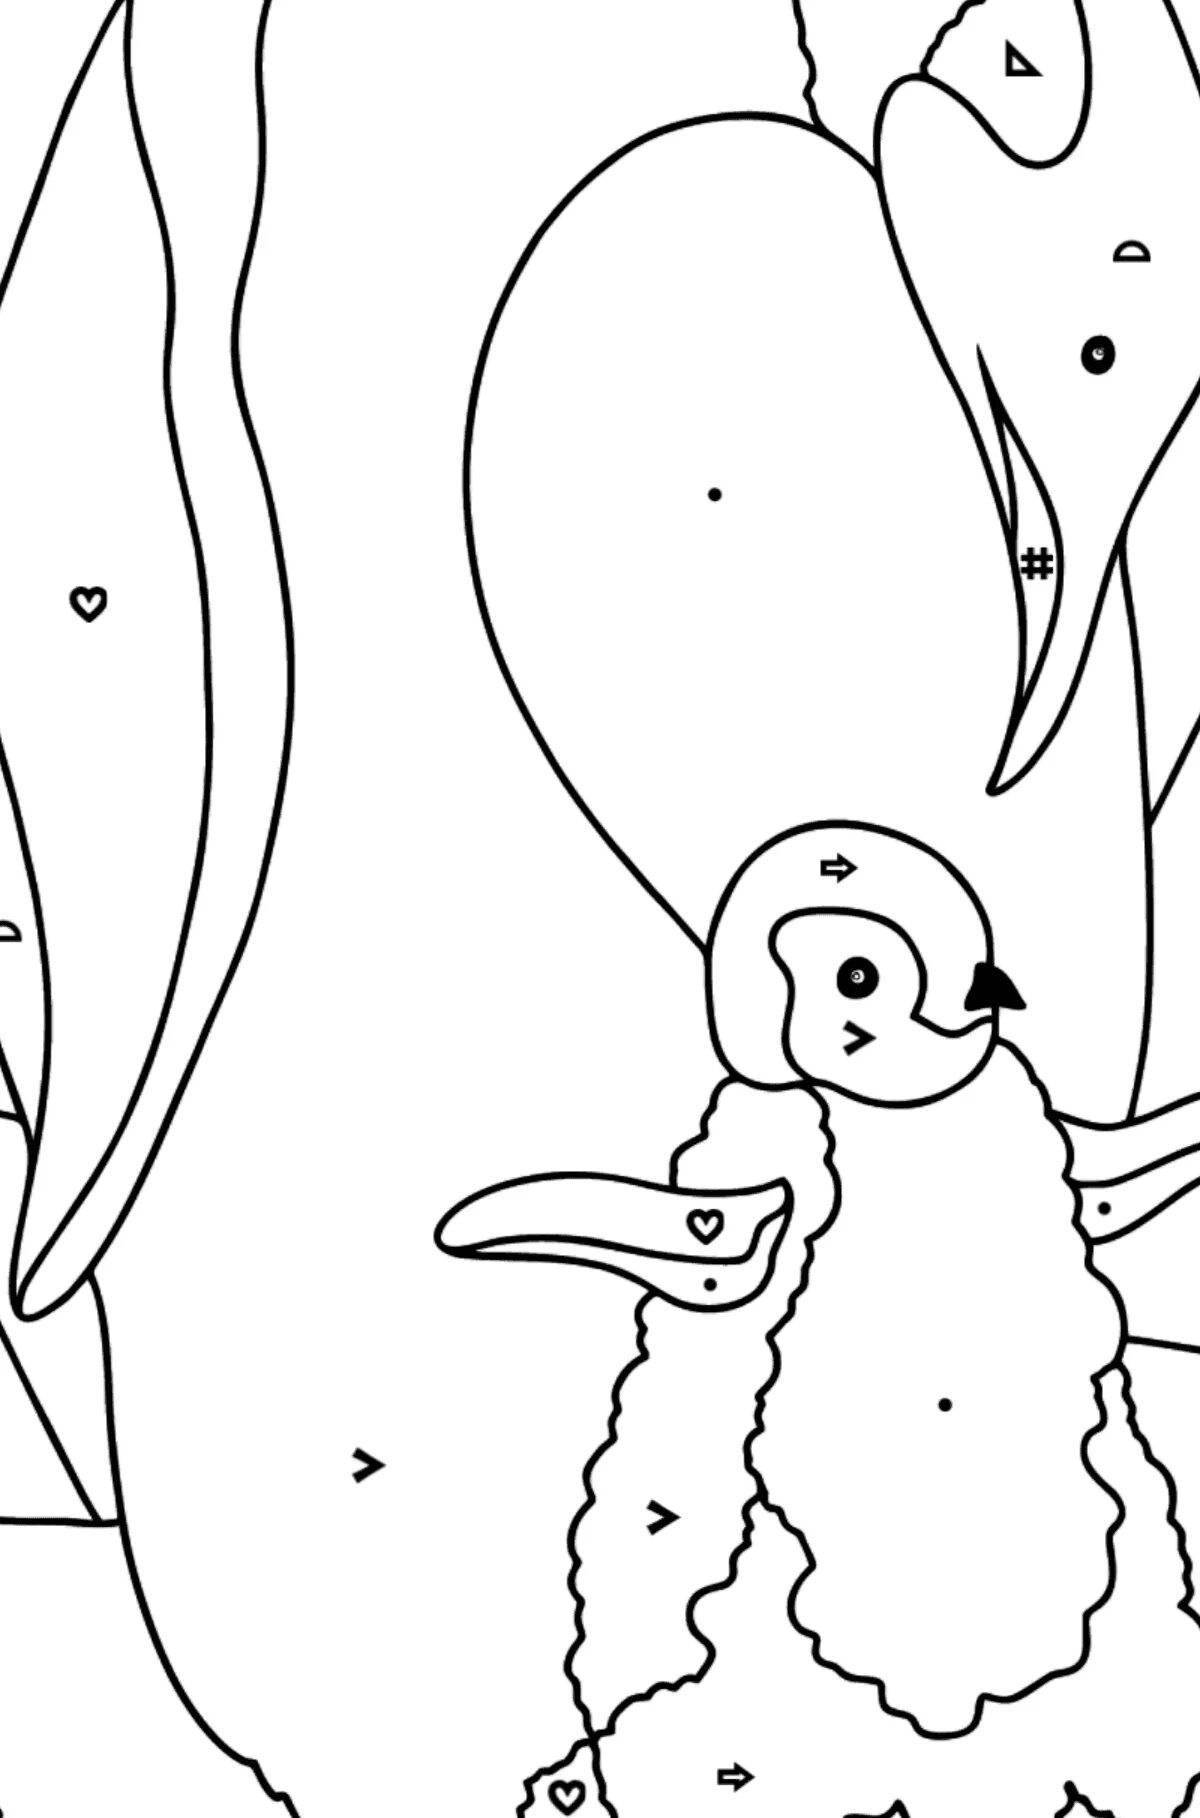 Coloring page adorable ice cream penguin